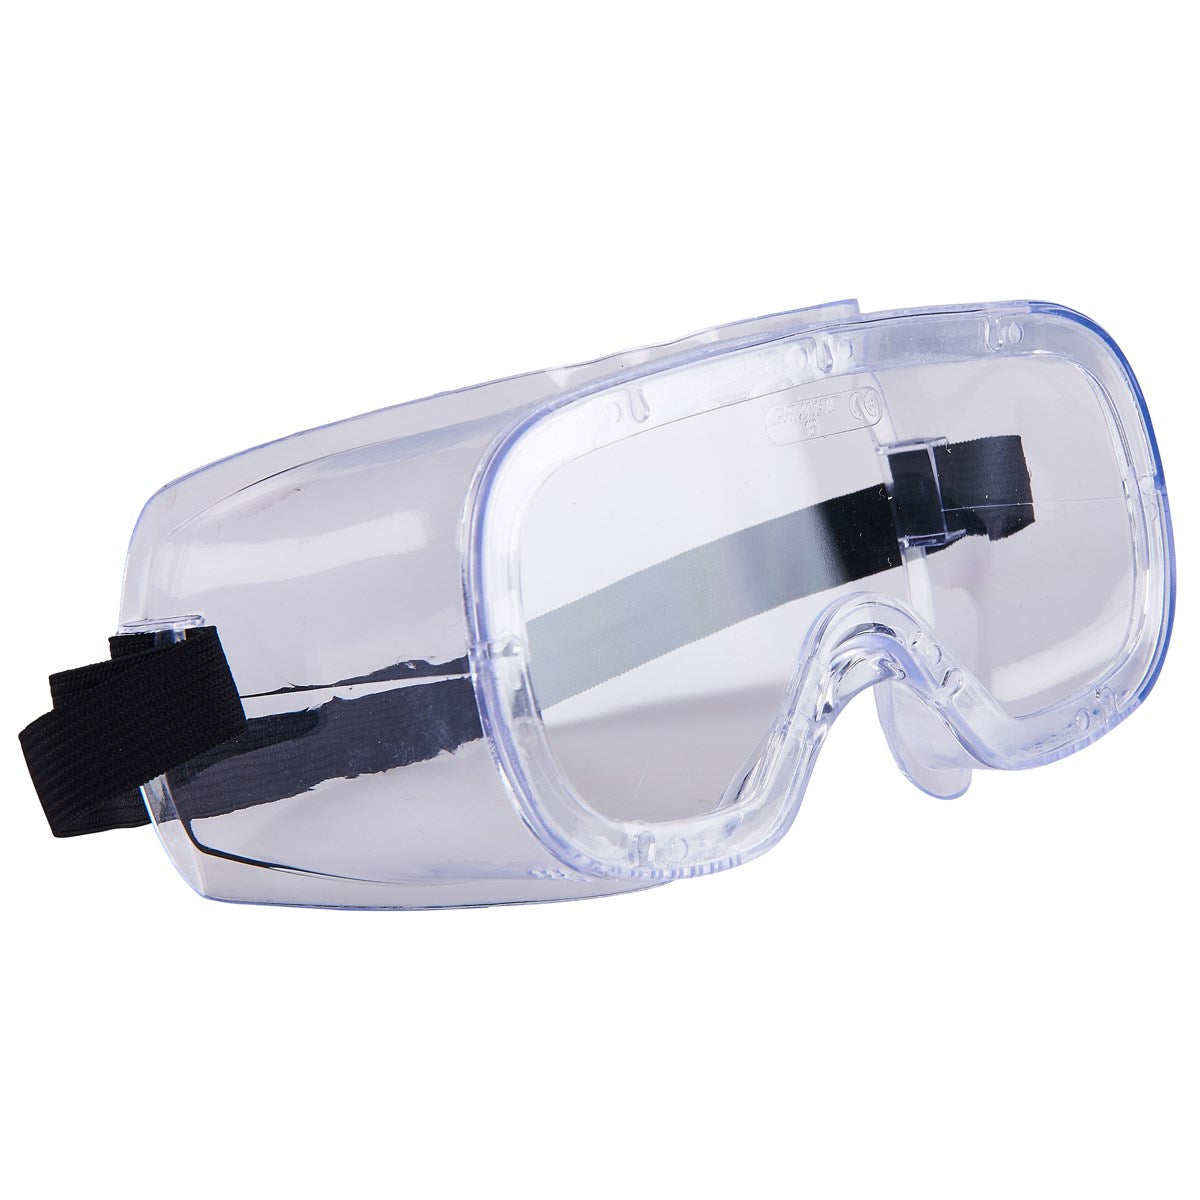 safety goggles (A3550)